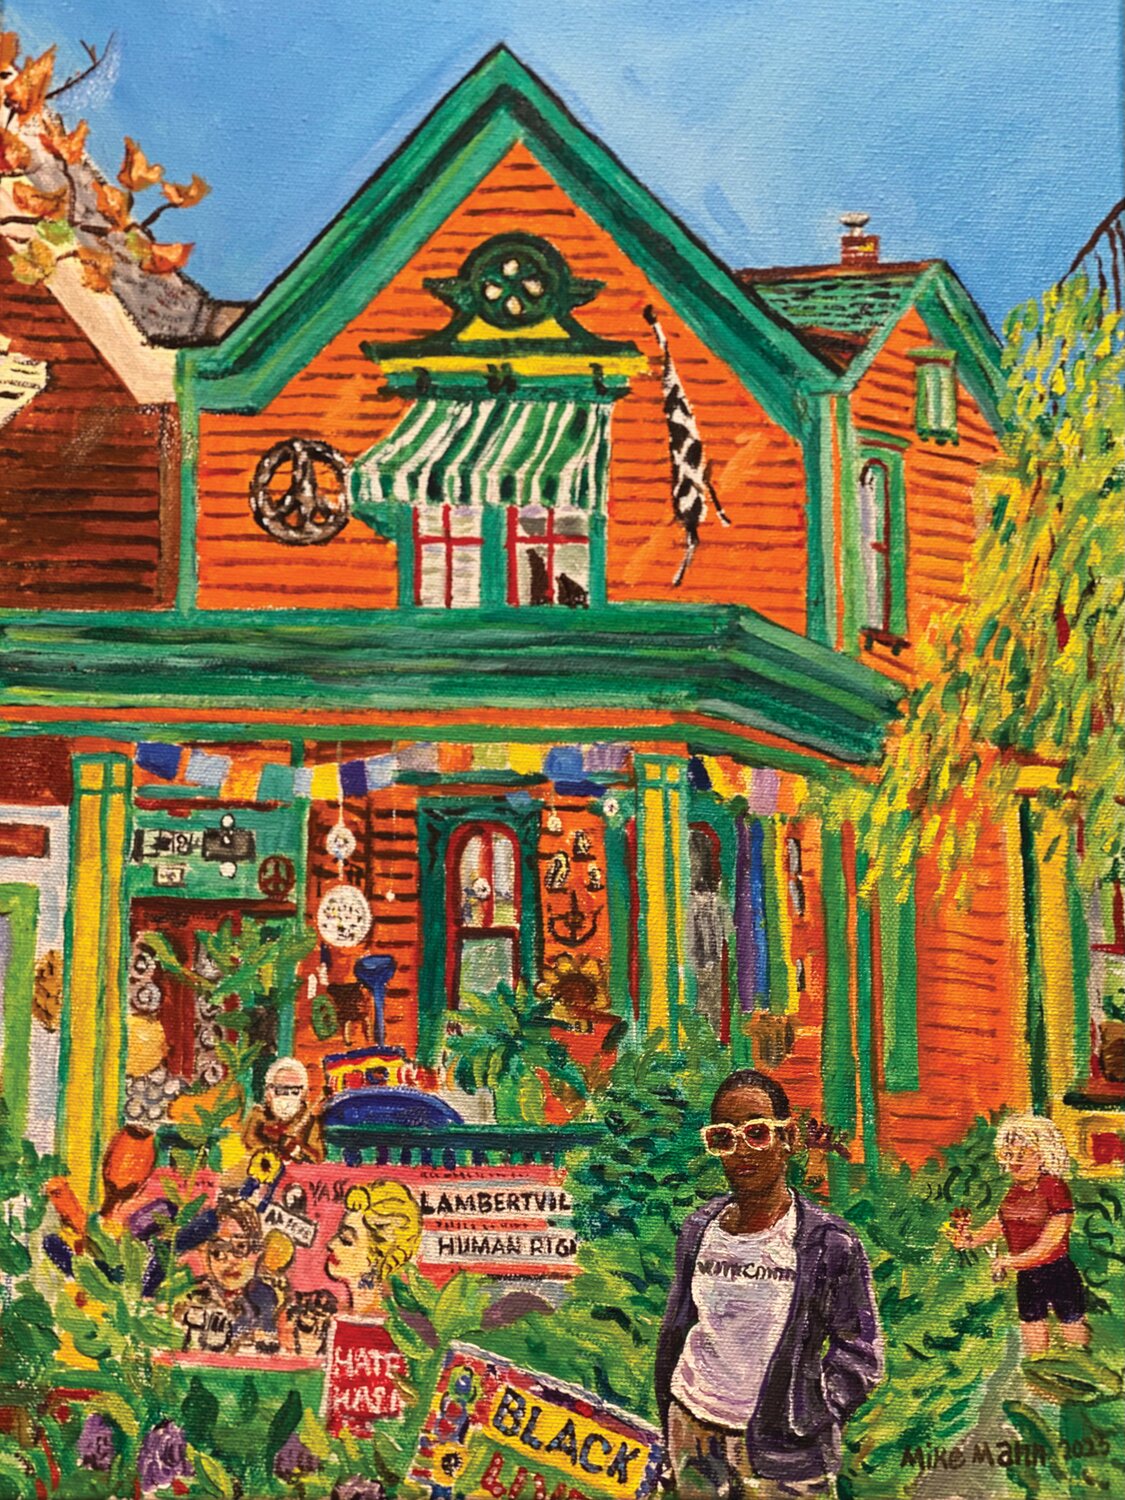 “Activist House Lambertville” is an oil painting by Mike Mann.